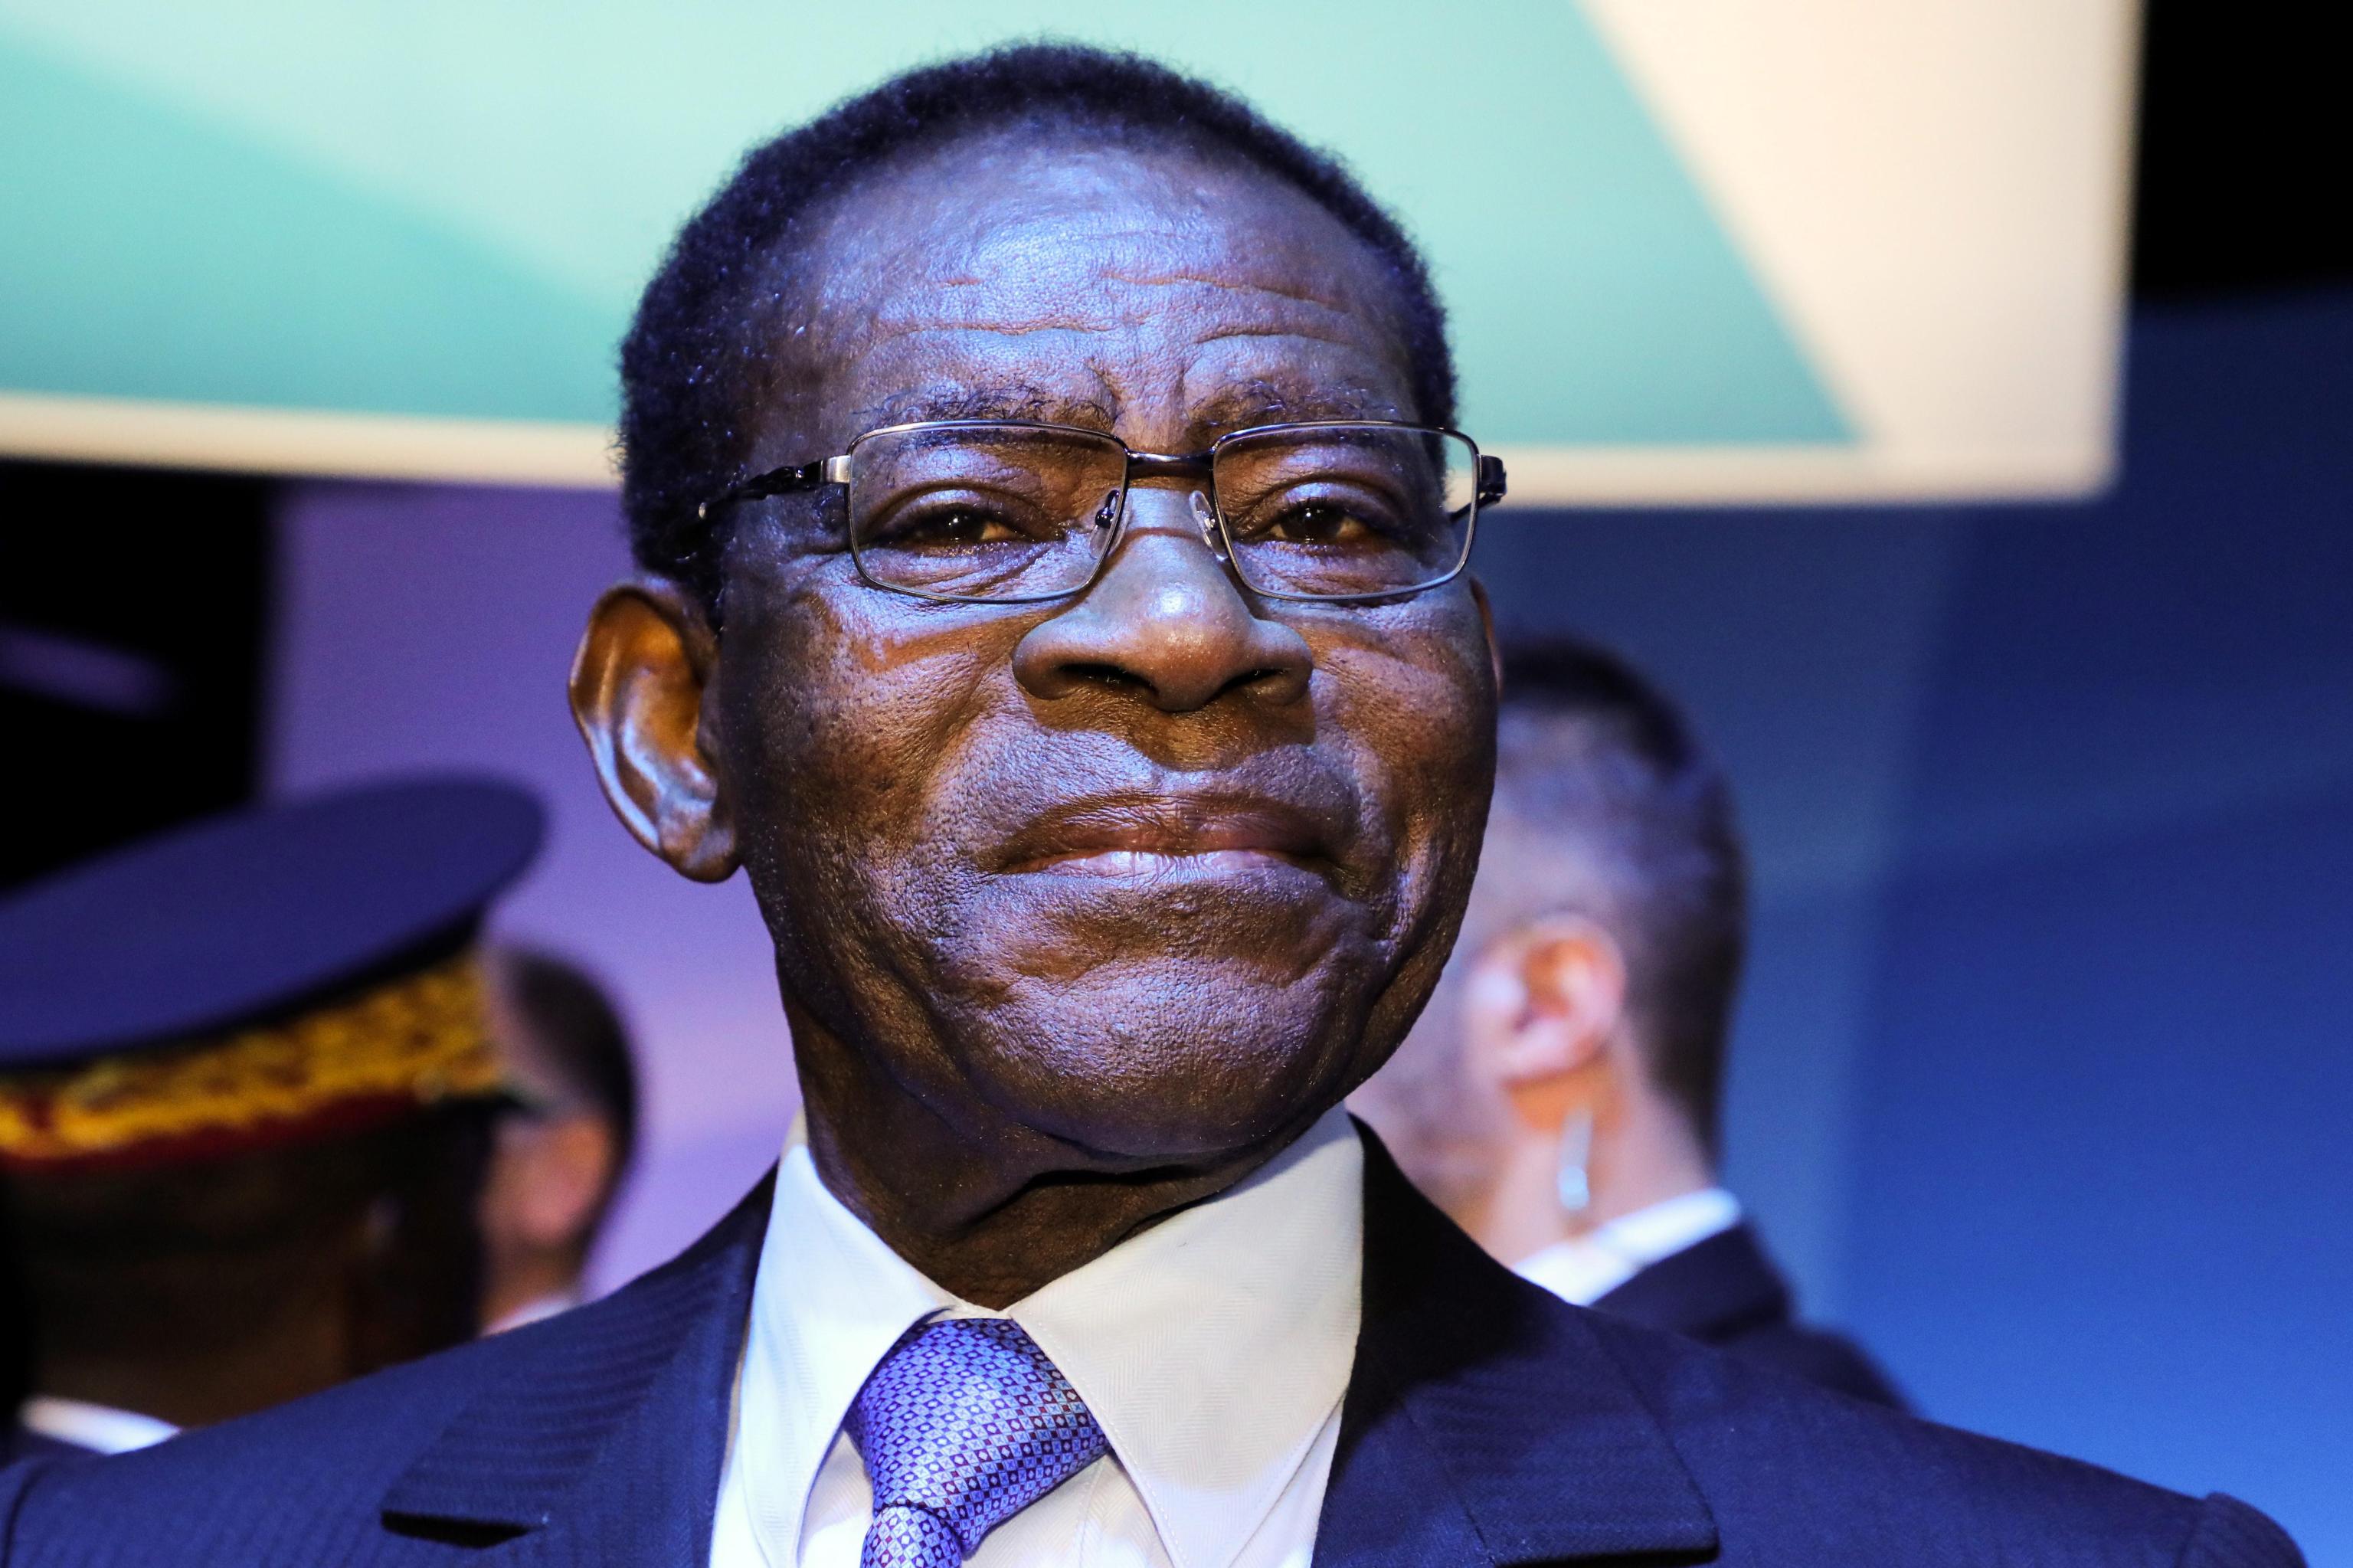 epa07990148 Equatorial Guinea President Teodoro Obiang Nguema Mbasogo attends the plenary session of the Paris Peace Forum, in Paris, France, 12 November 2019. The international event on global governance issues and multilateralism takes place on 12 to 13 November in Paris.  EPA/LUDOVIC MARIN / POOL MAXPPP OUT